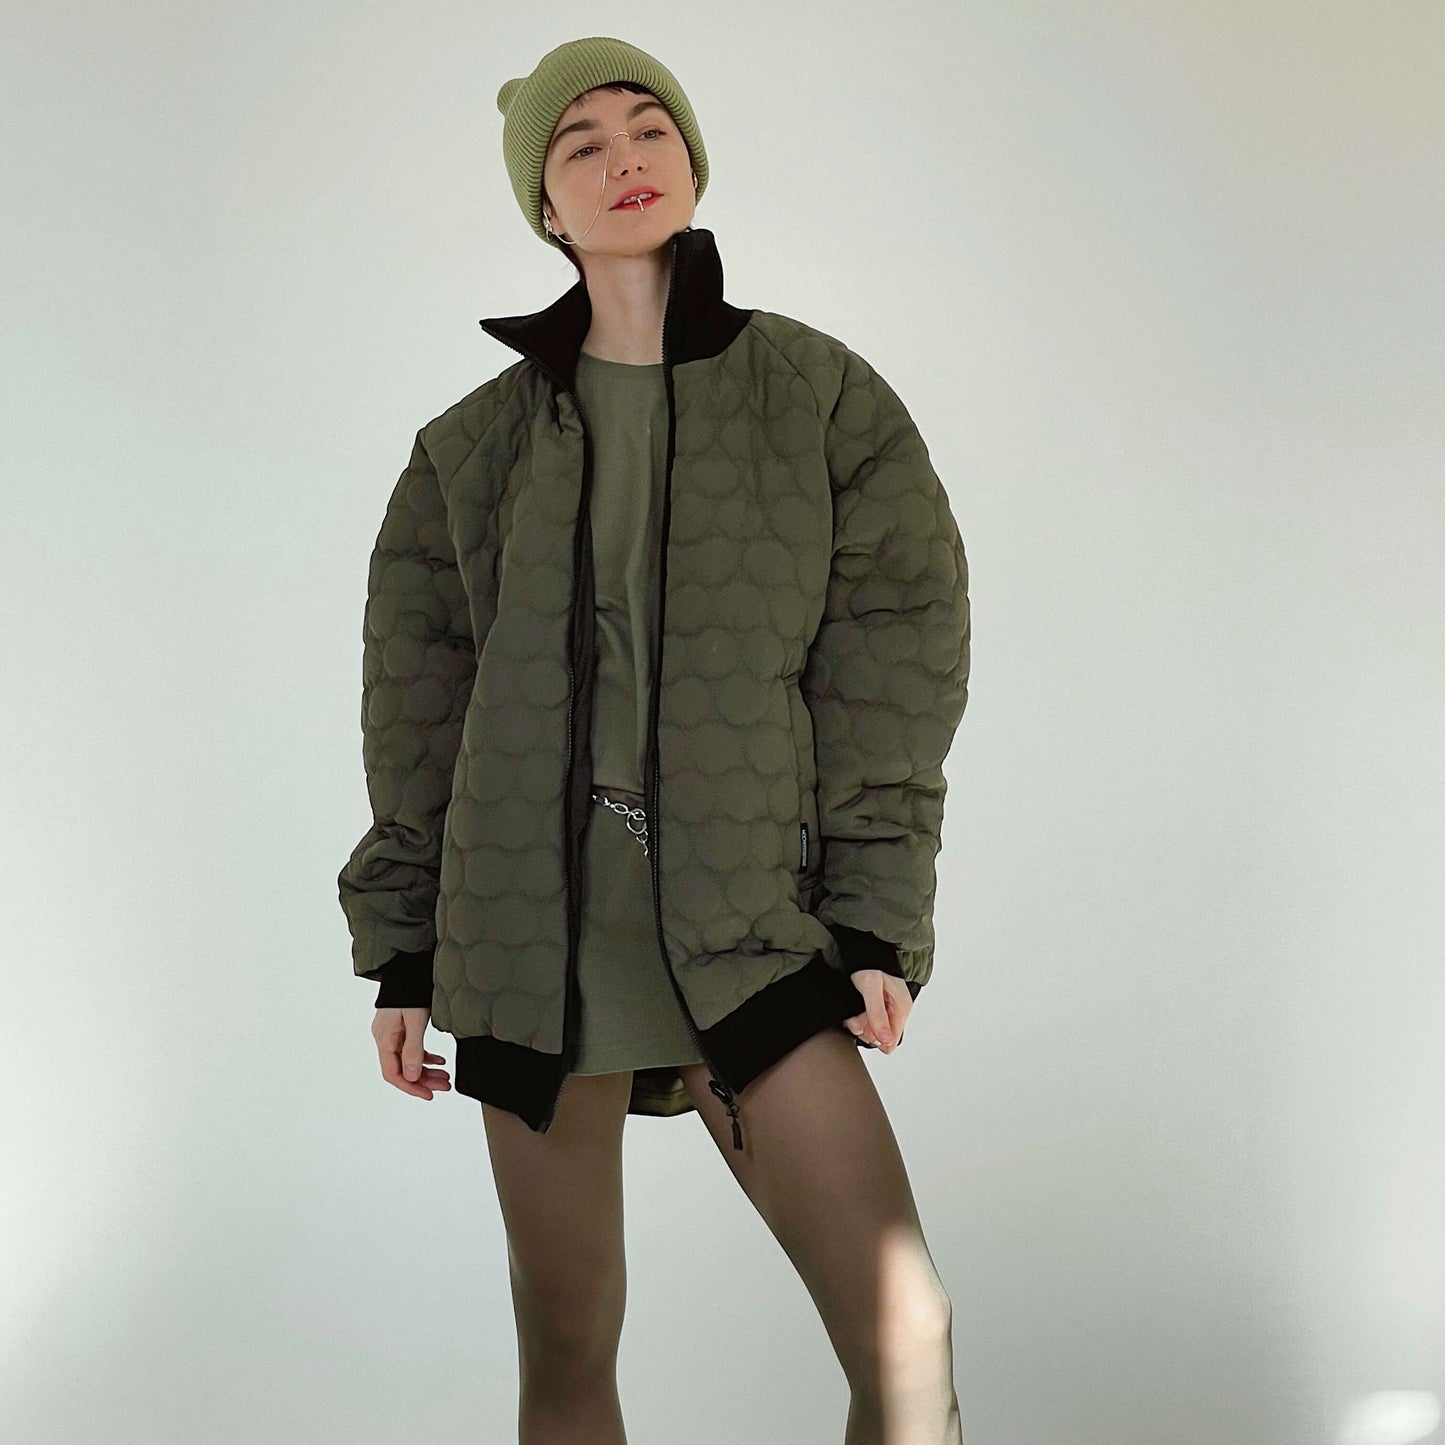 Demi-season doublesided quilted bomber jacket in black/khaki color